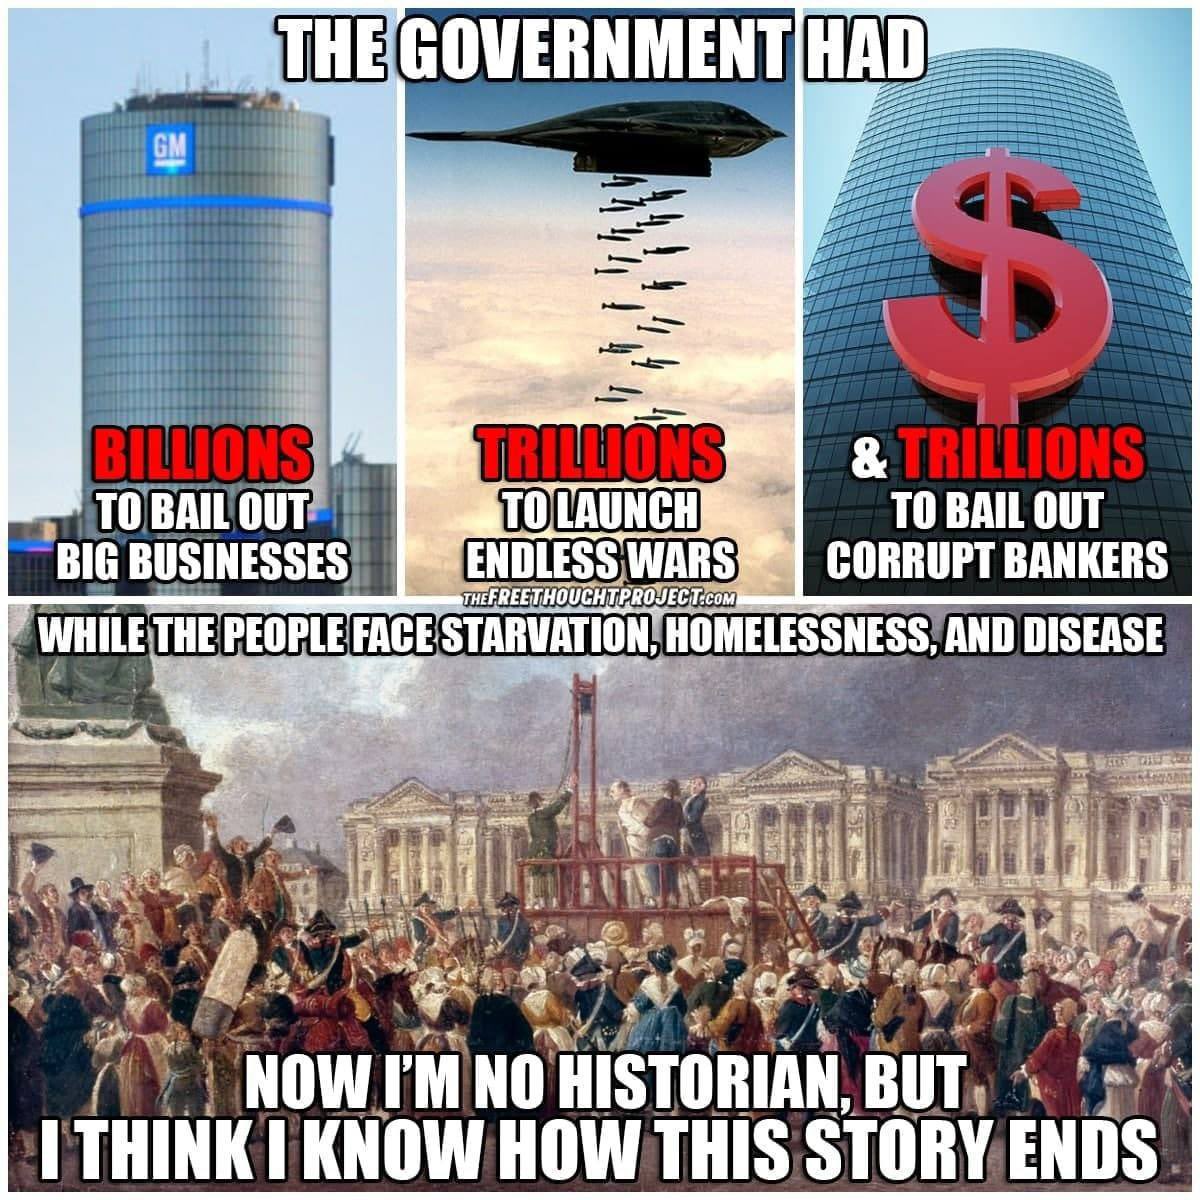 To cut off the head of the snake, we must first starve the parasite bankers. Now we Know How this Story Going to End.😬😳😳